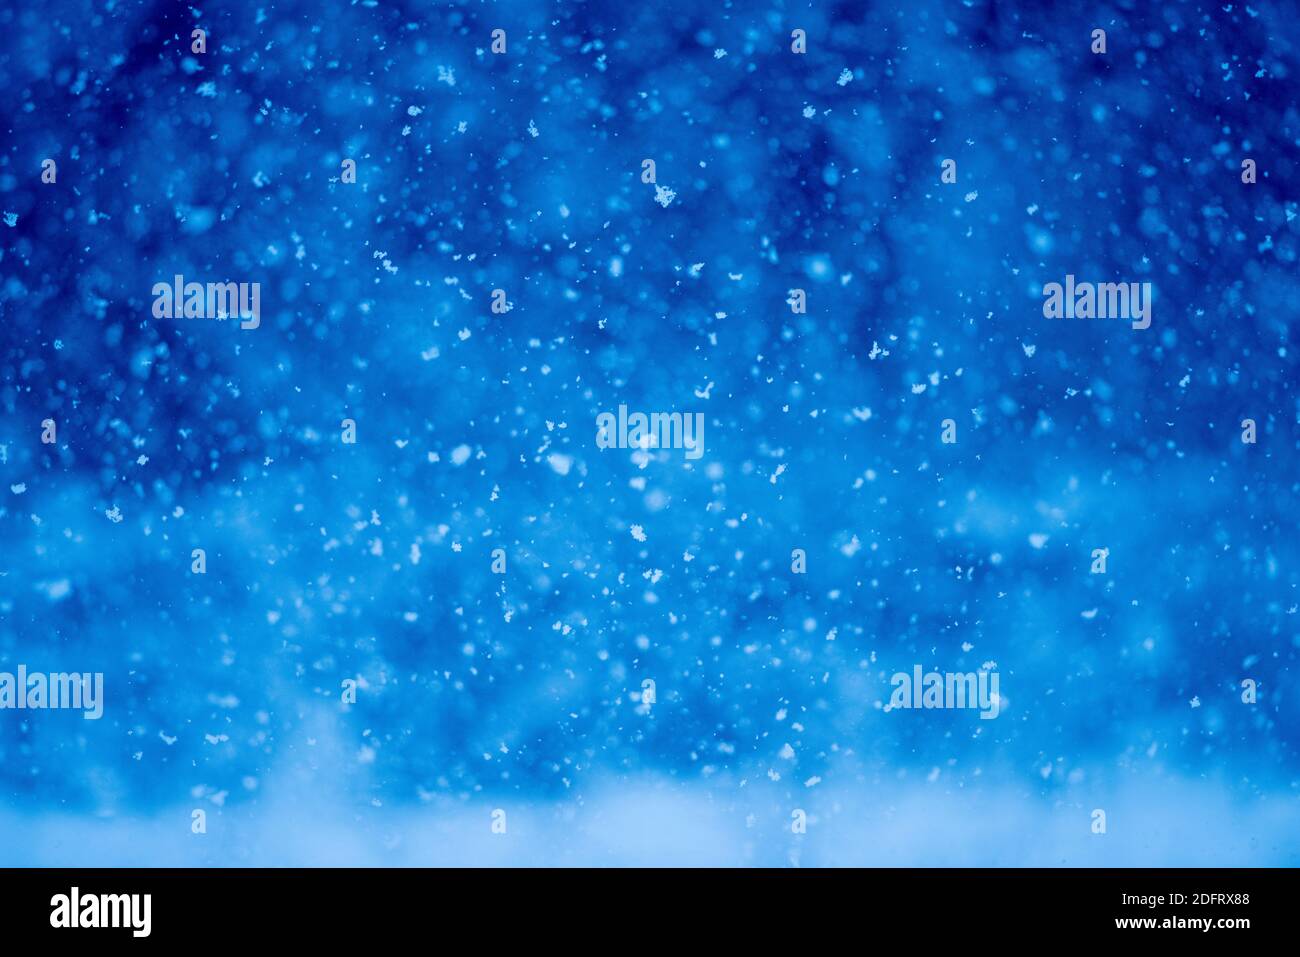 Snowflakes fall during a winter storm. Stock Photo